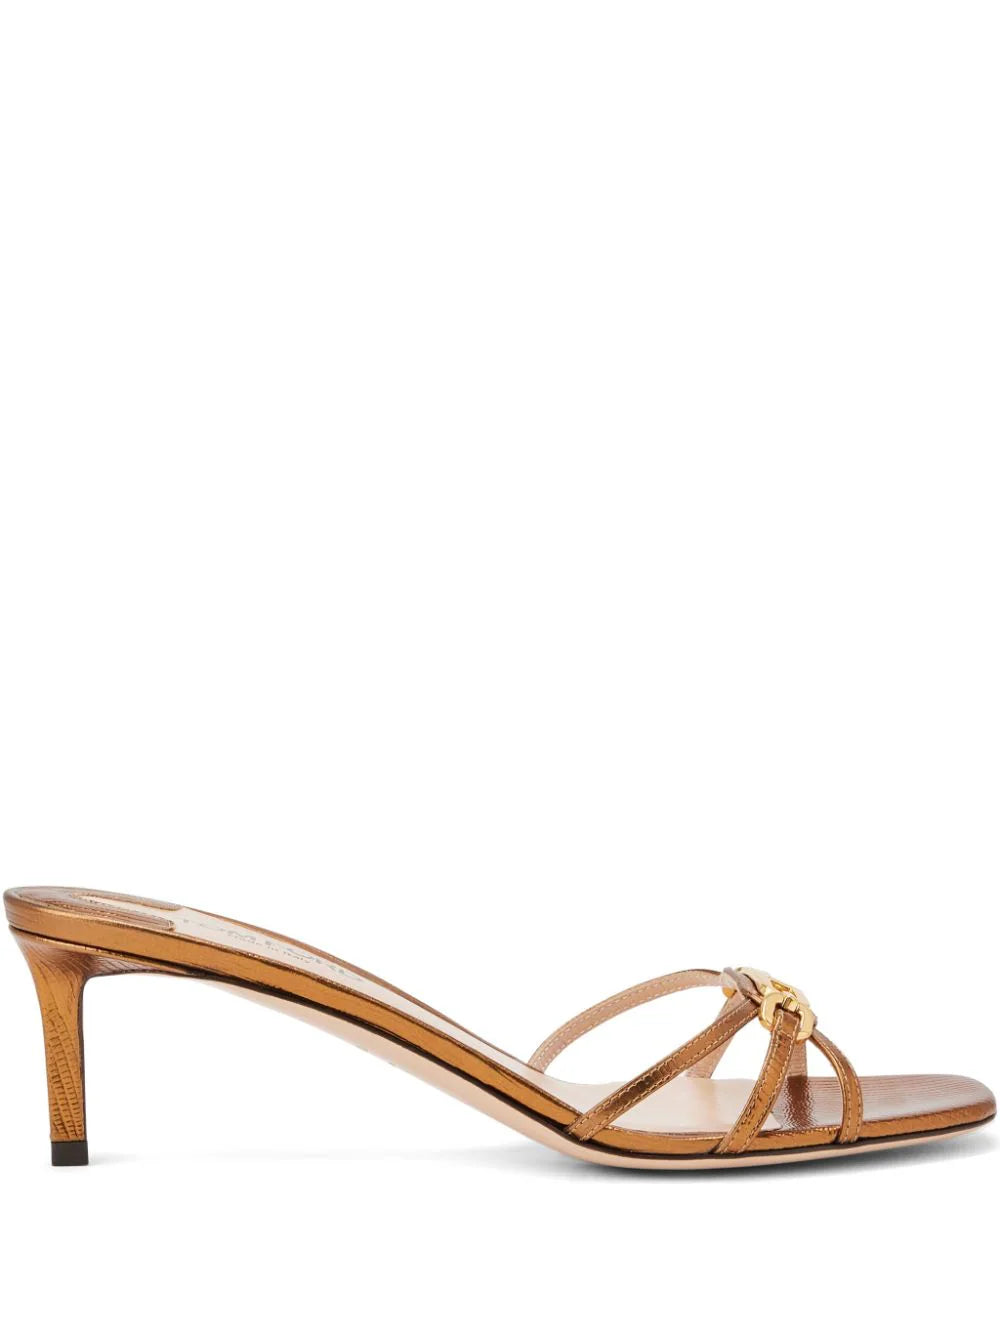 Tom Ford Whitney Mule